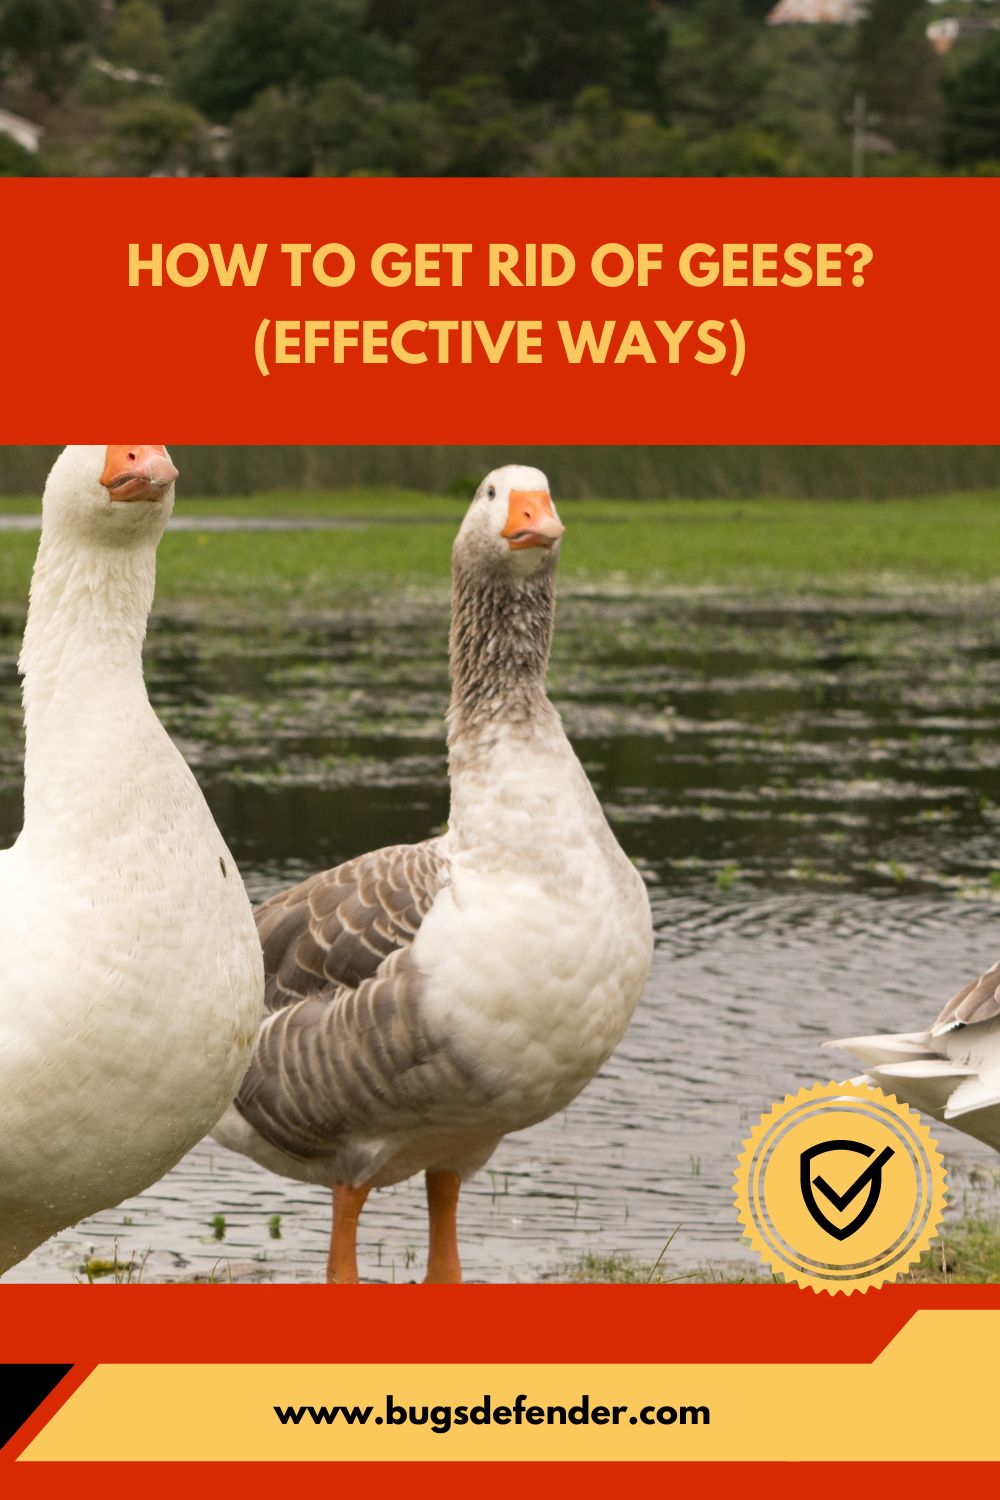 How To Get Rid of Geese (Effective Ways) pin1